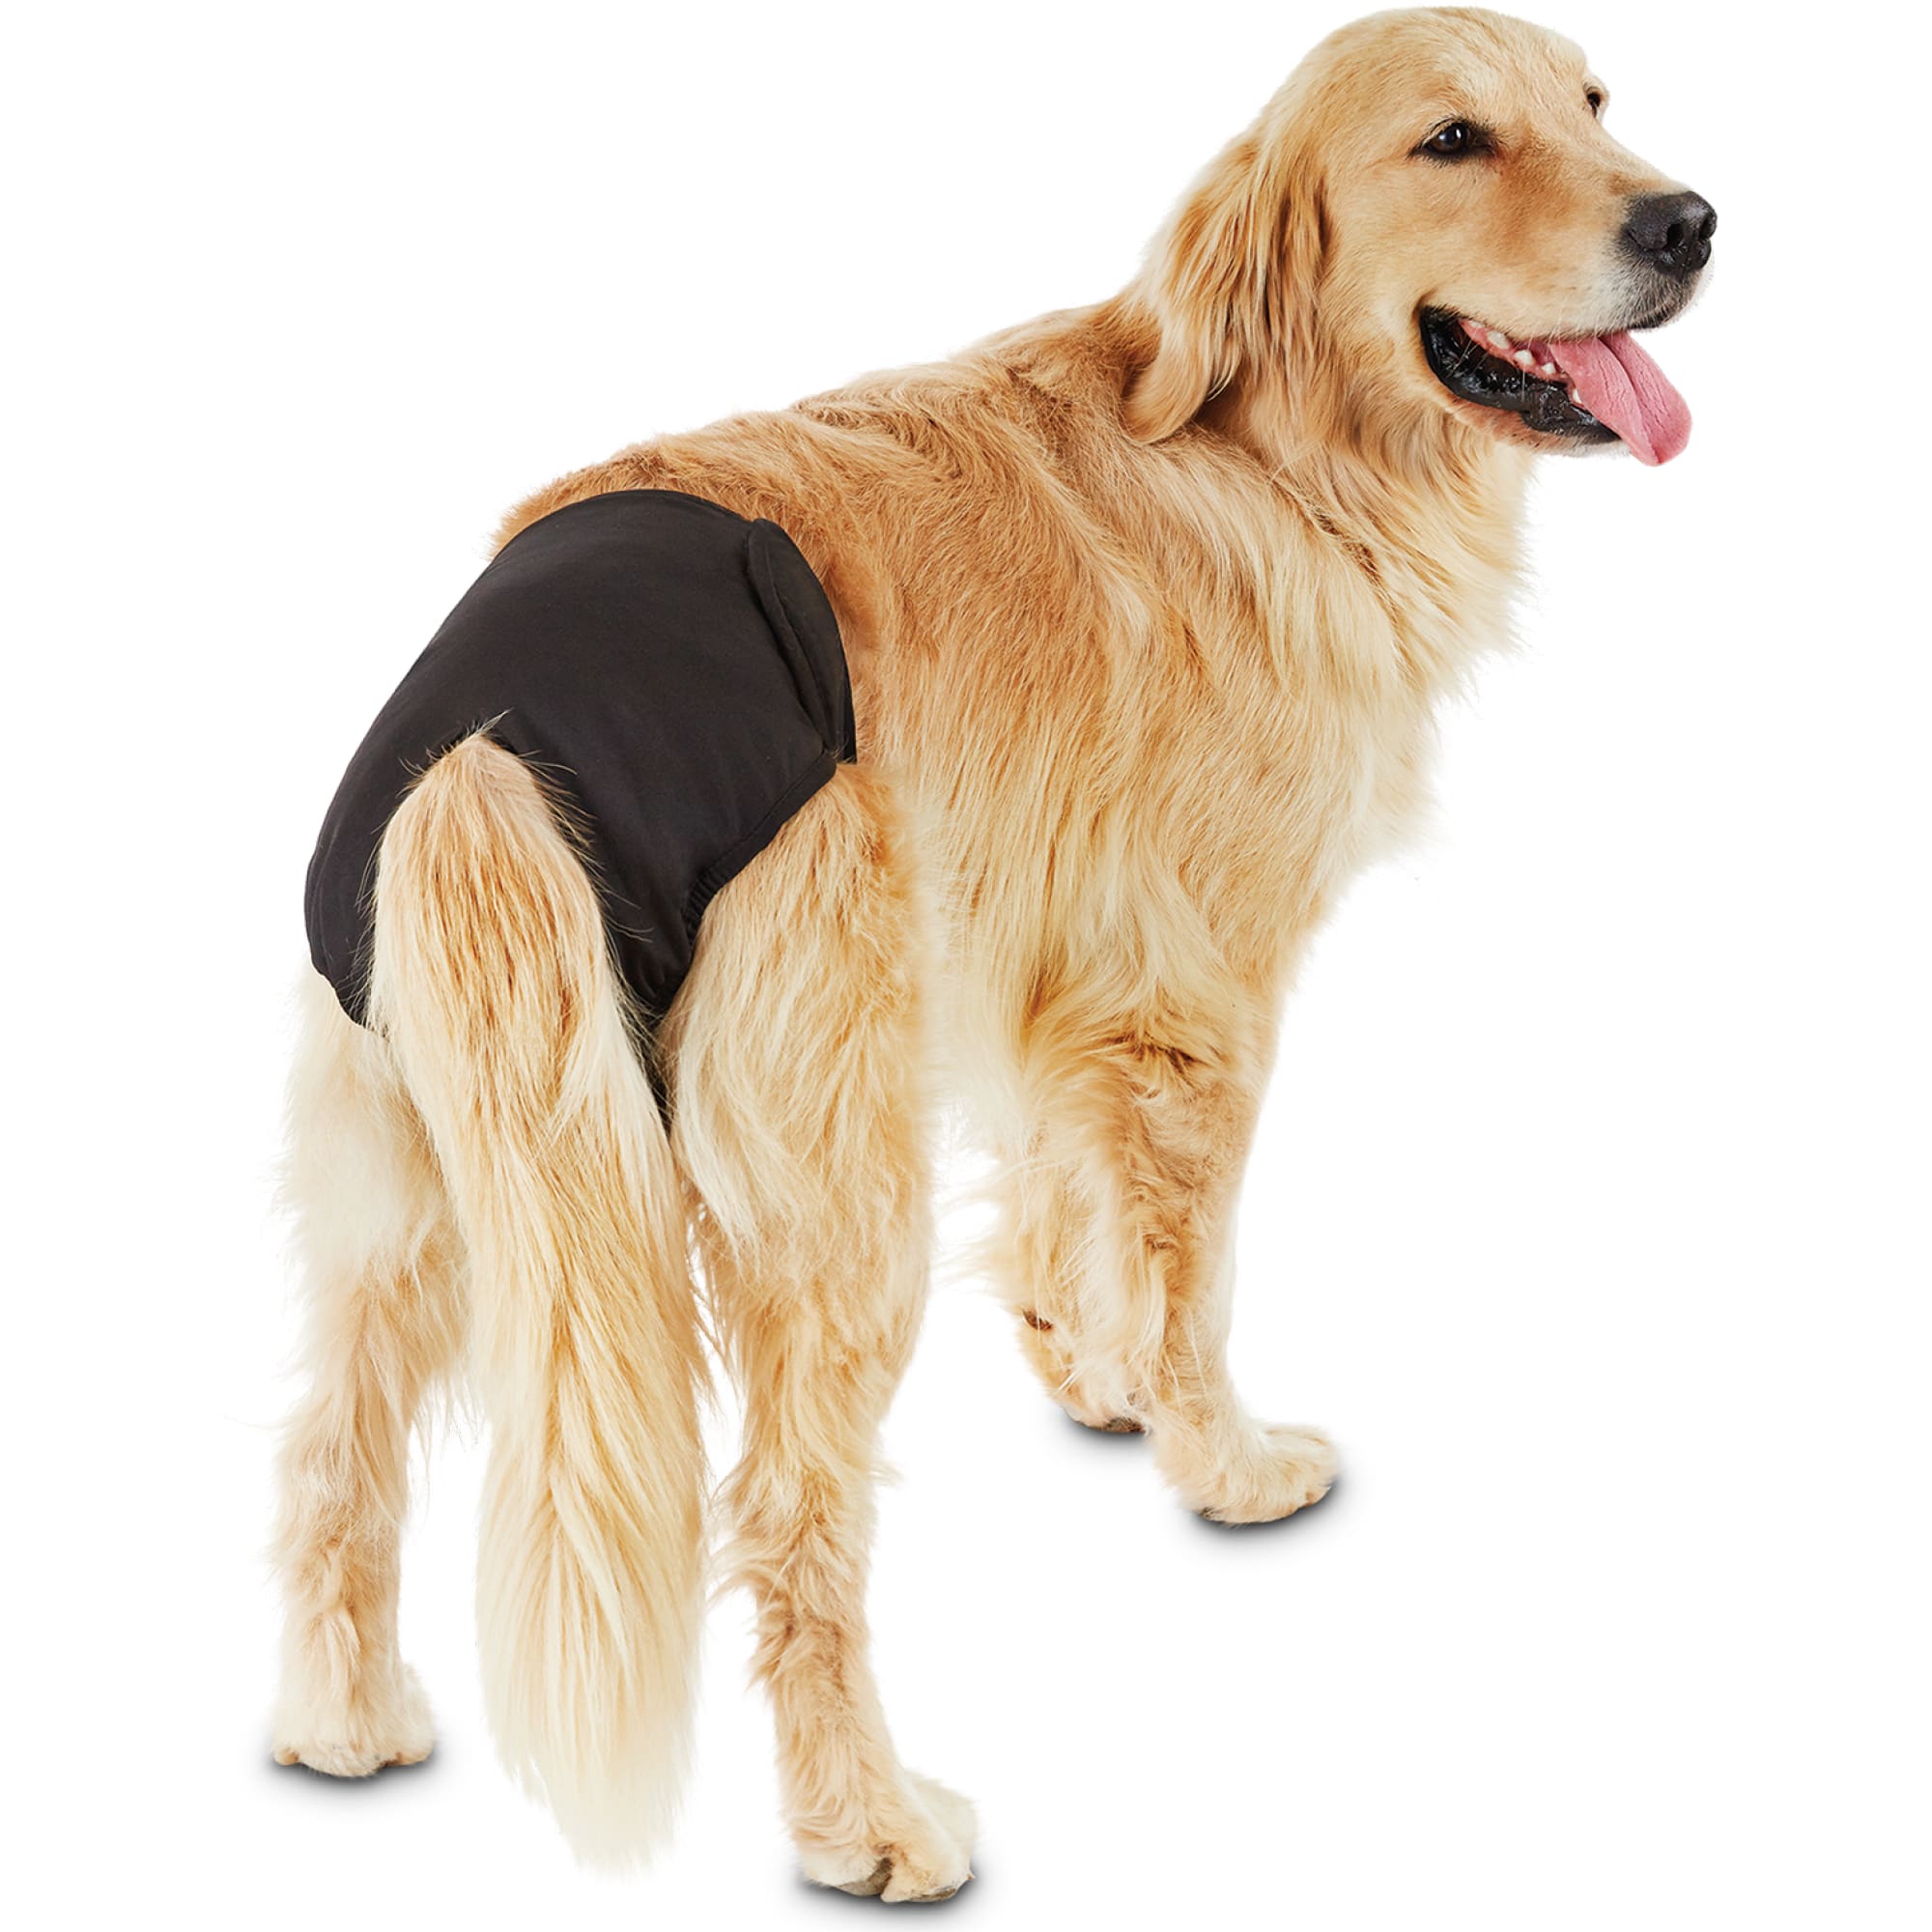 XYAA Reusable Washable Puppy Underwear Pets Supplies Female Dog